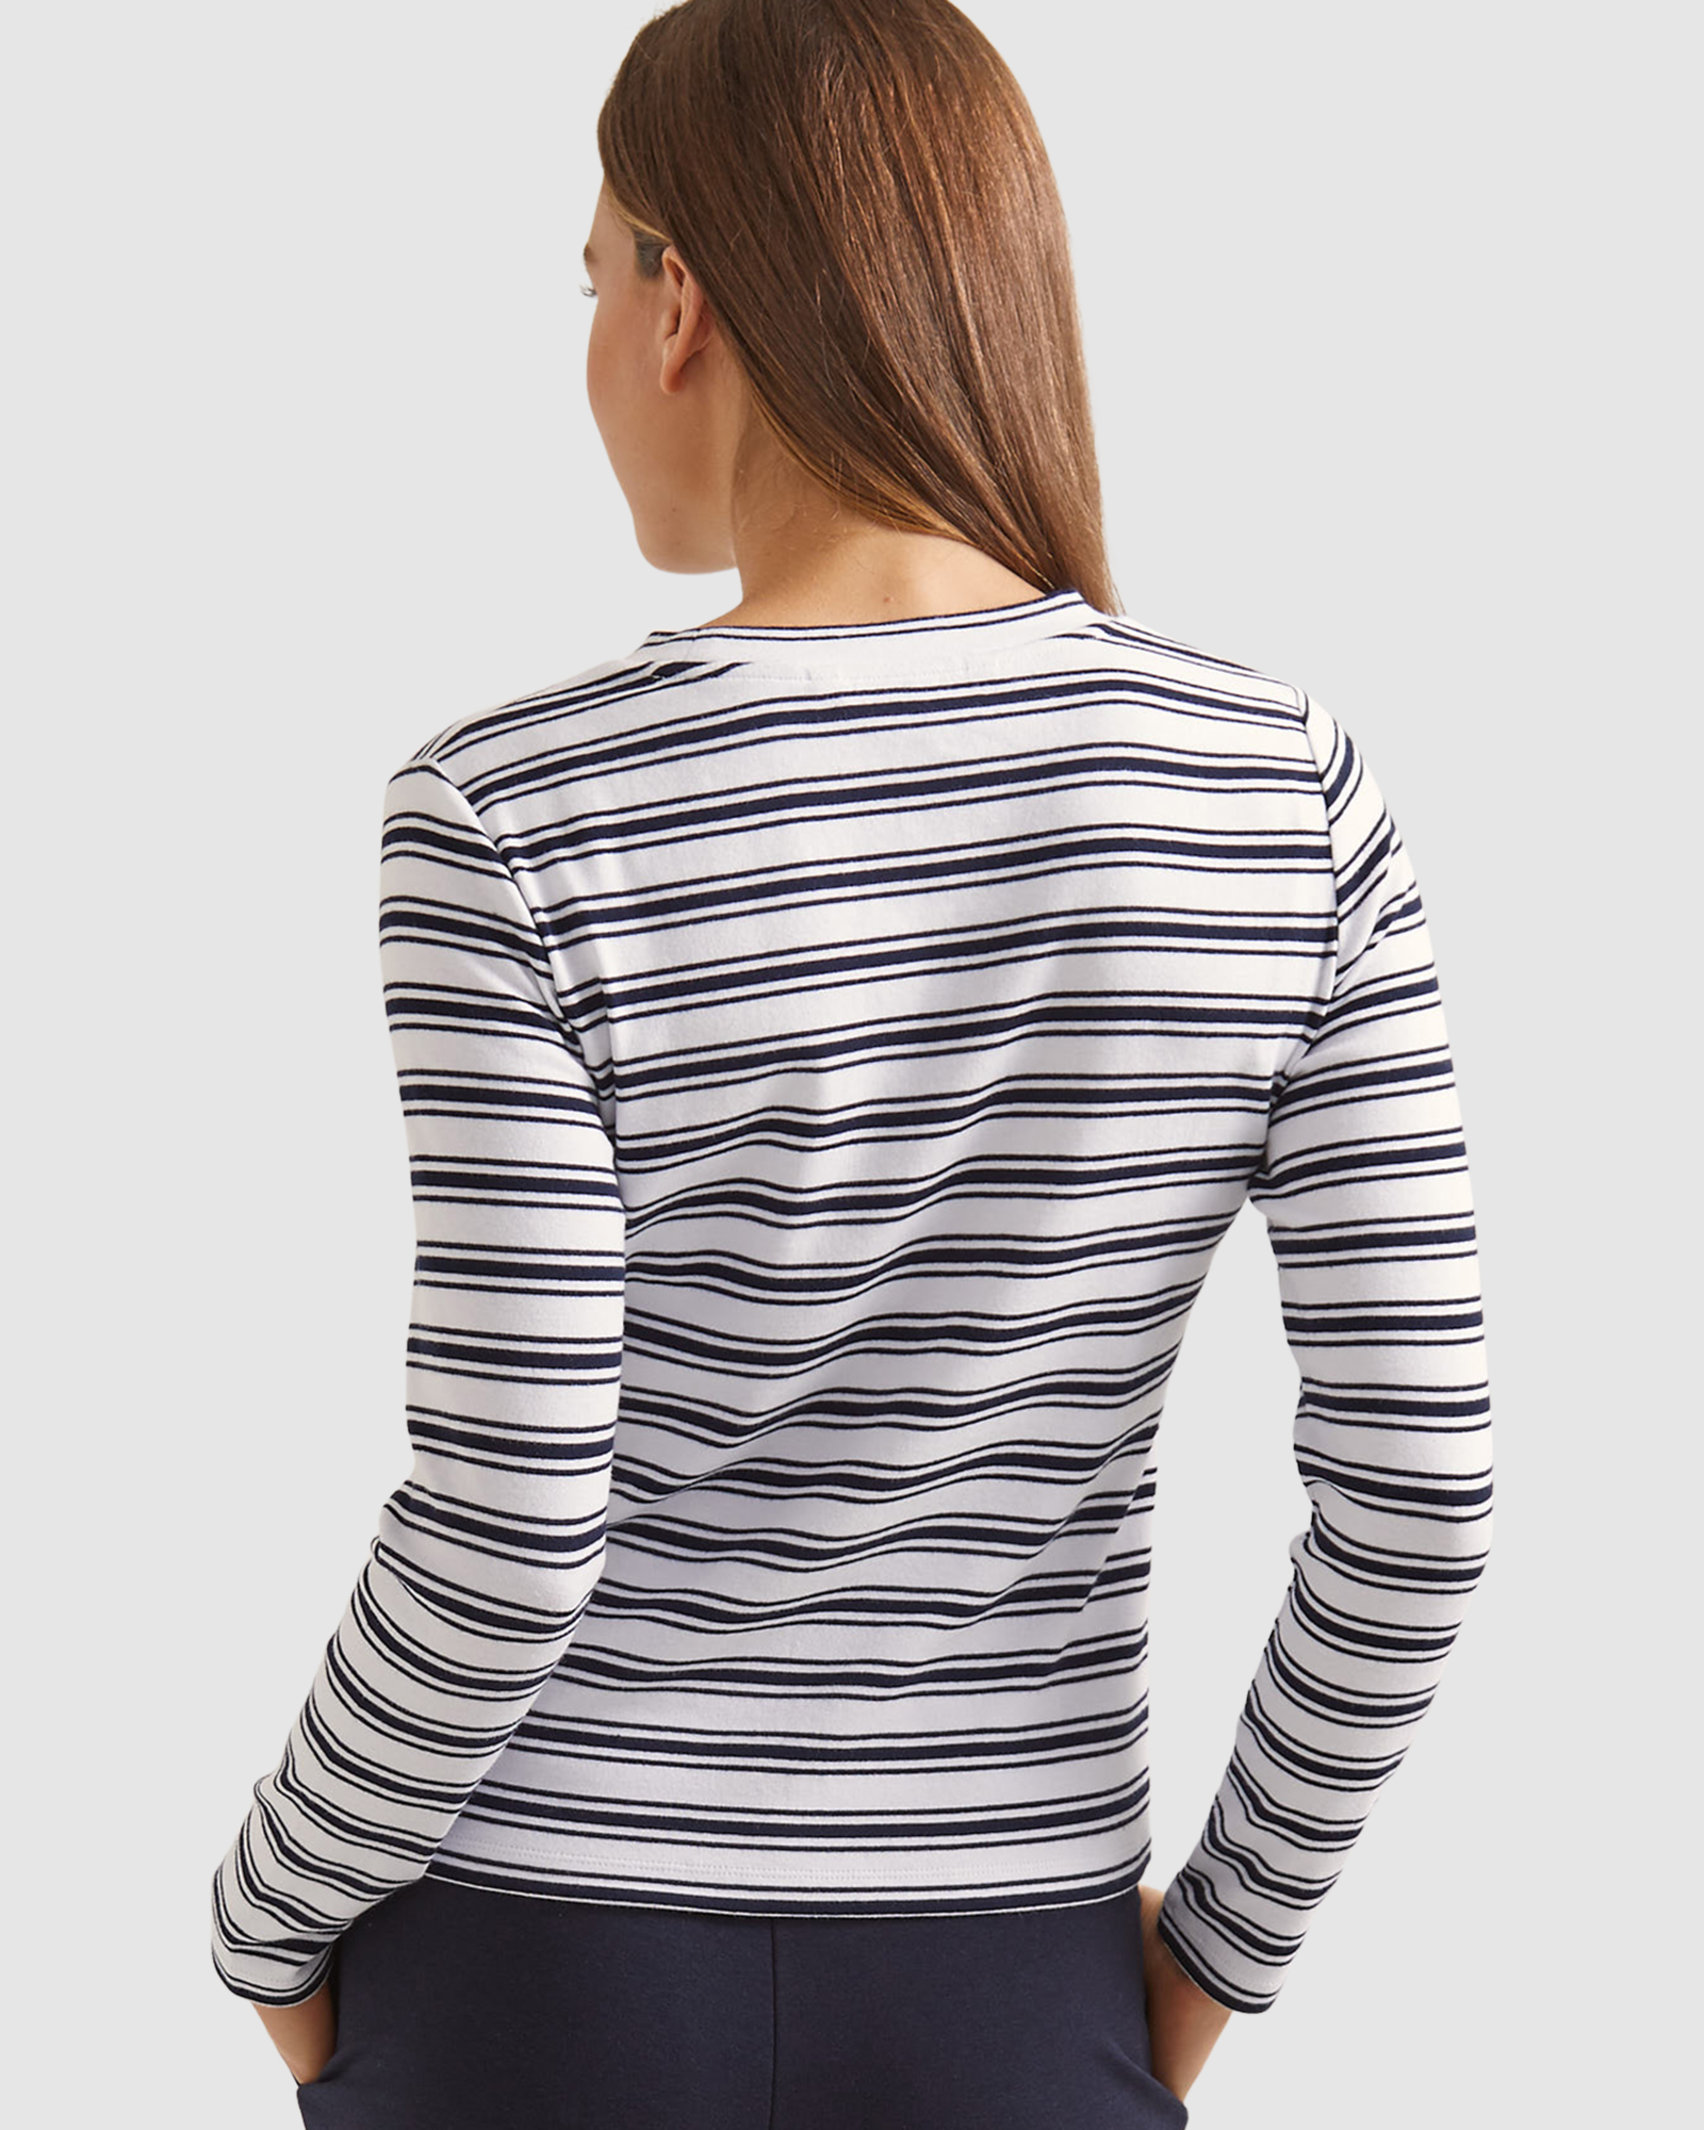 Organic Cotton Long Sleeve Tee in WHITE/NAVY